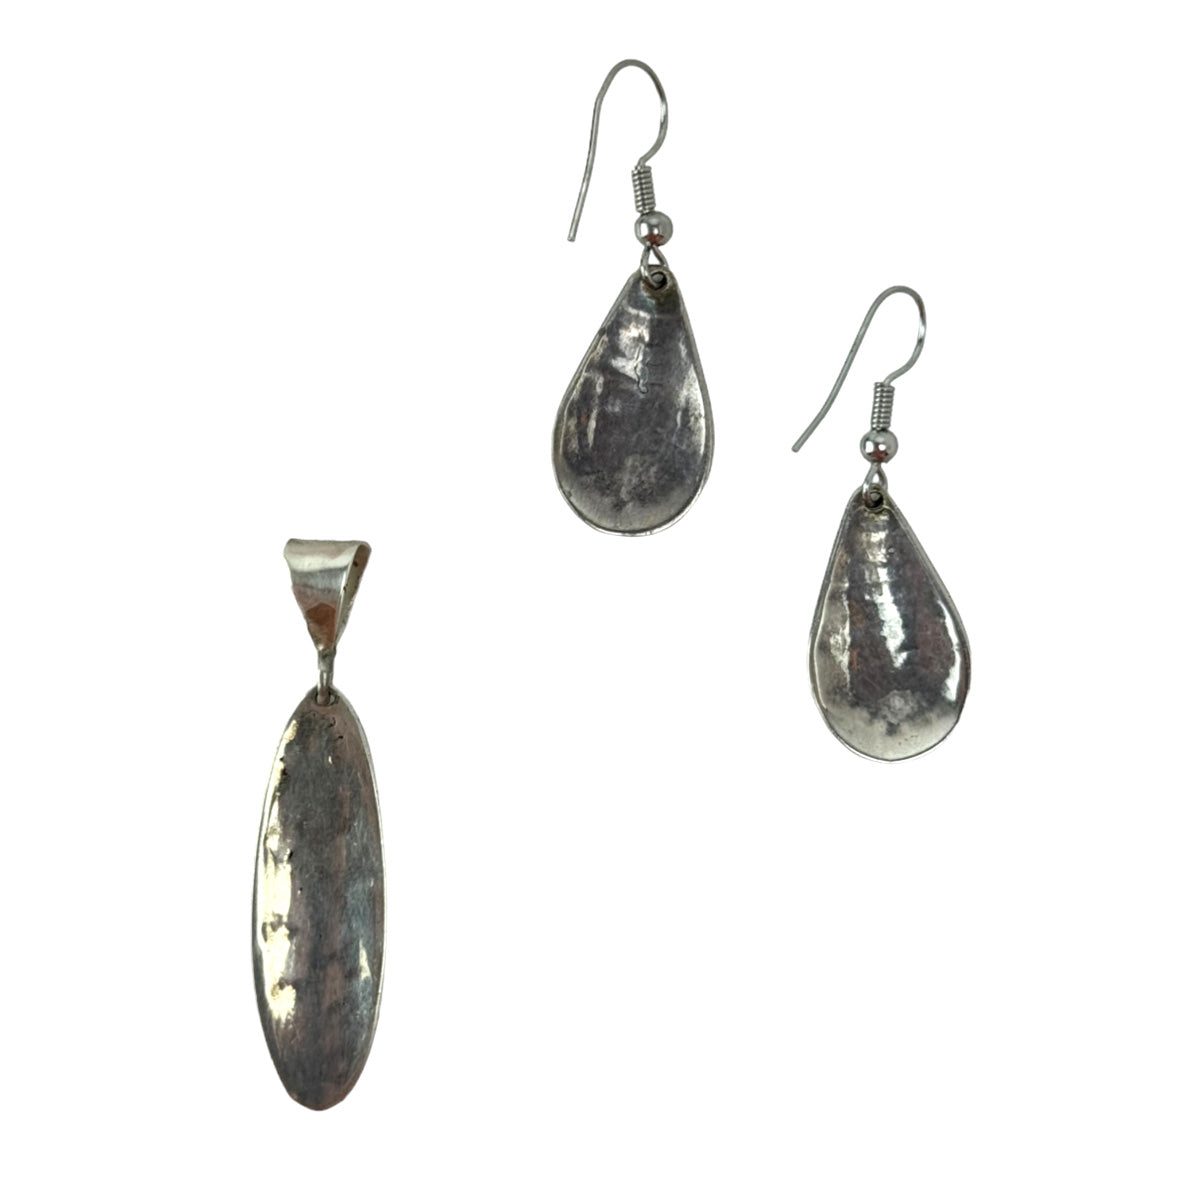 Hopi - Silver Overlay Pendant and French Hook Earrings Set c. 1960s (J16028-026)